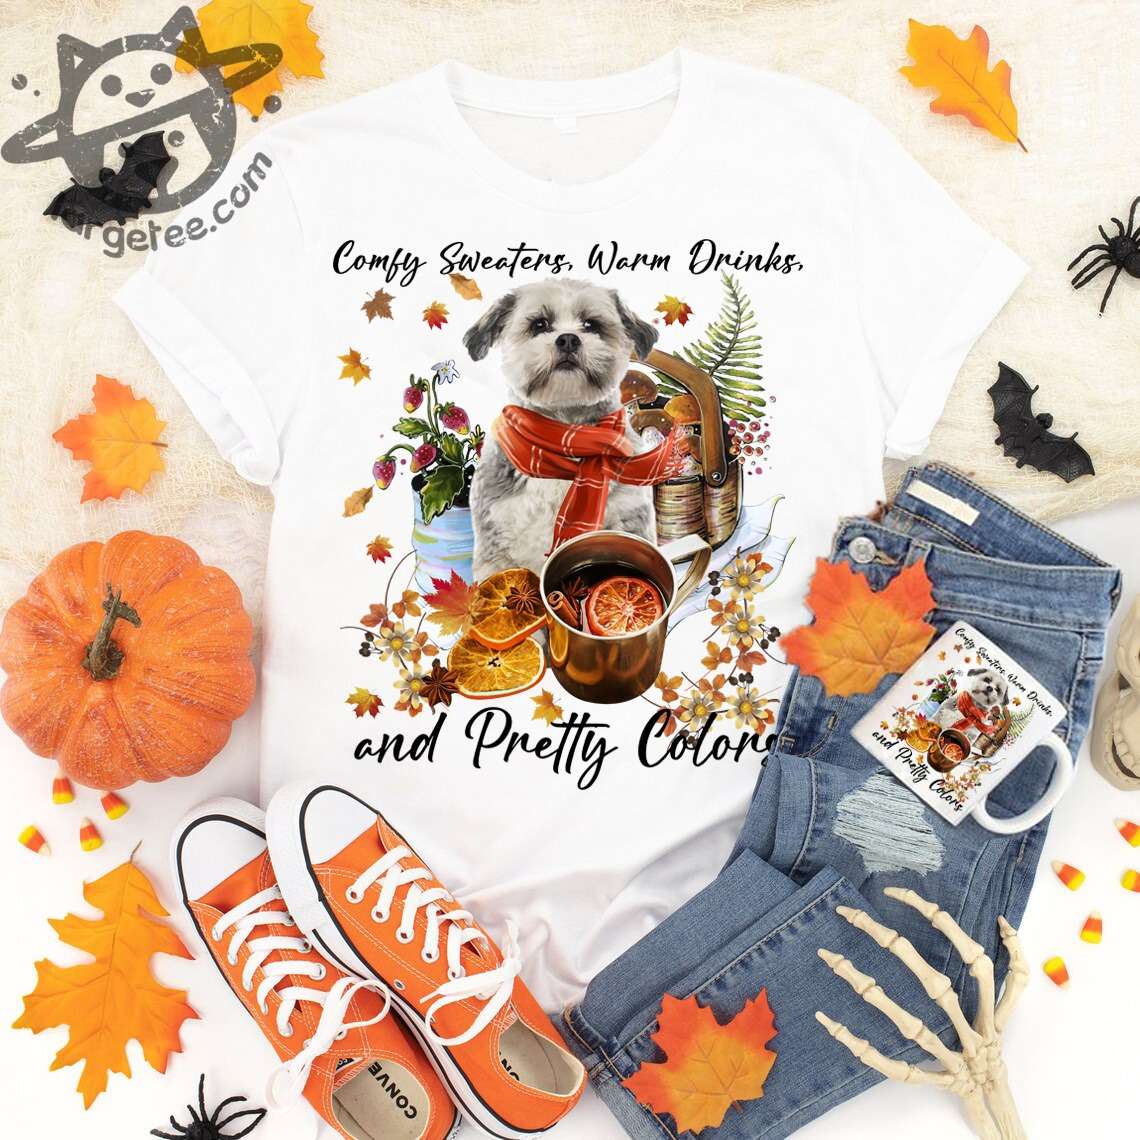 Autumn Shih Tzu - Compy sweaters warm drinks and pretty color